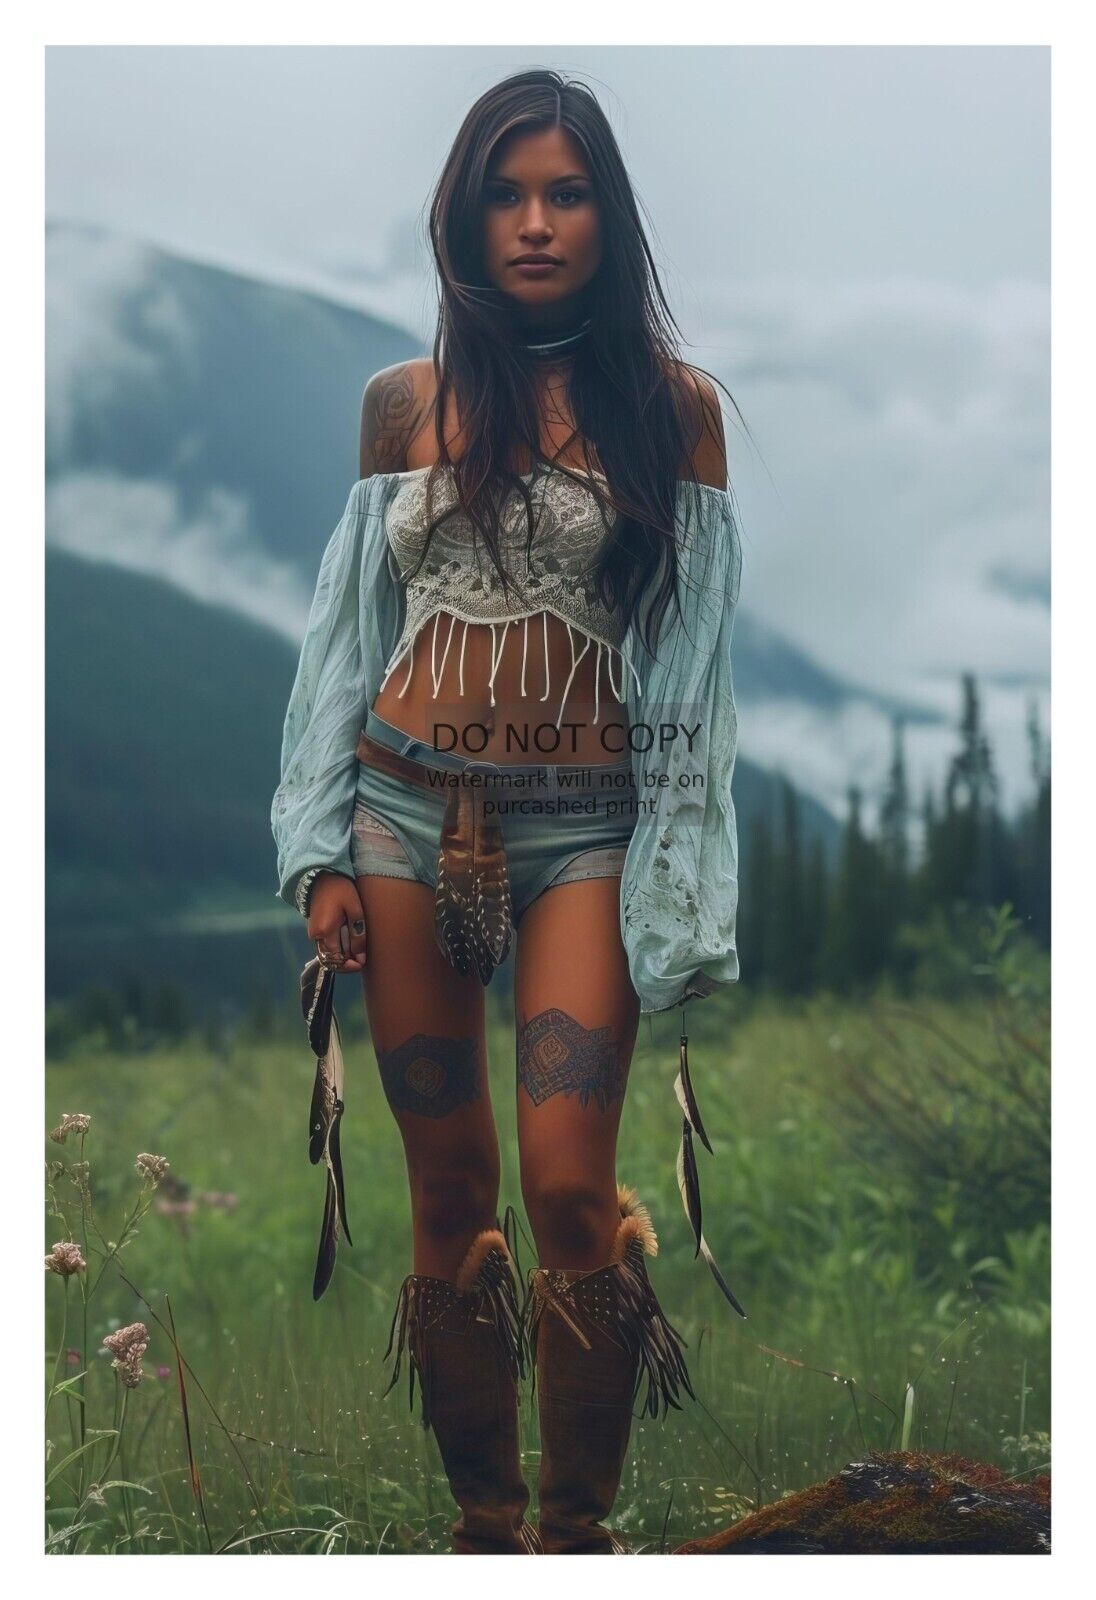 GORGEOUS YOUNG NATIVE AMERICAN LADY IN MOUNTAIN 4X6 FANTASY PHOTO